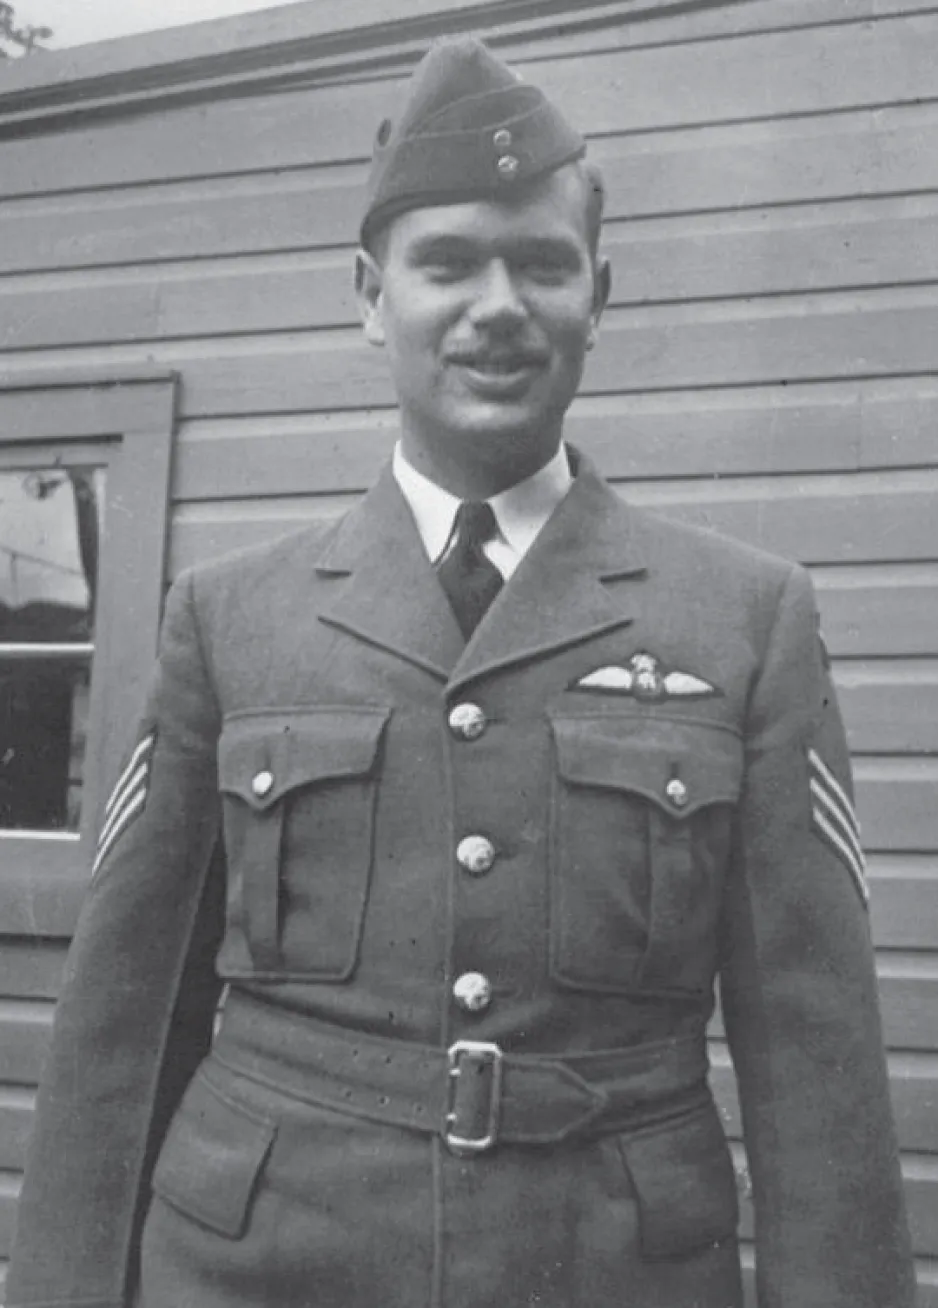 Pilot Officer Burpee after receiving his wings at Rideau Cottage in 1940